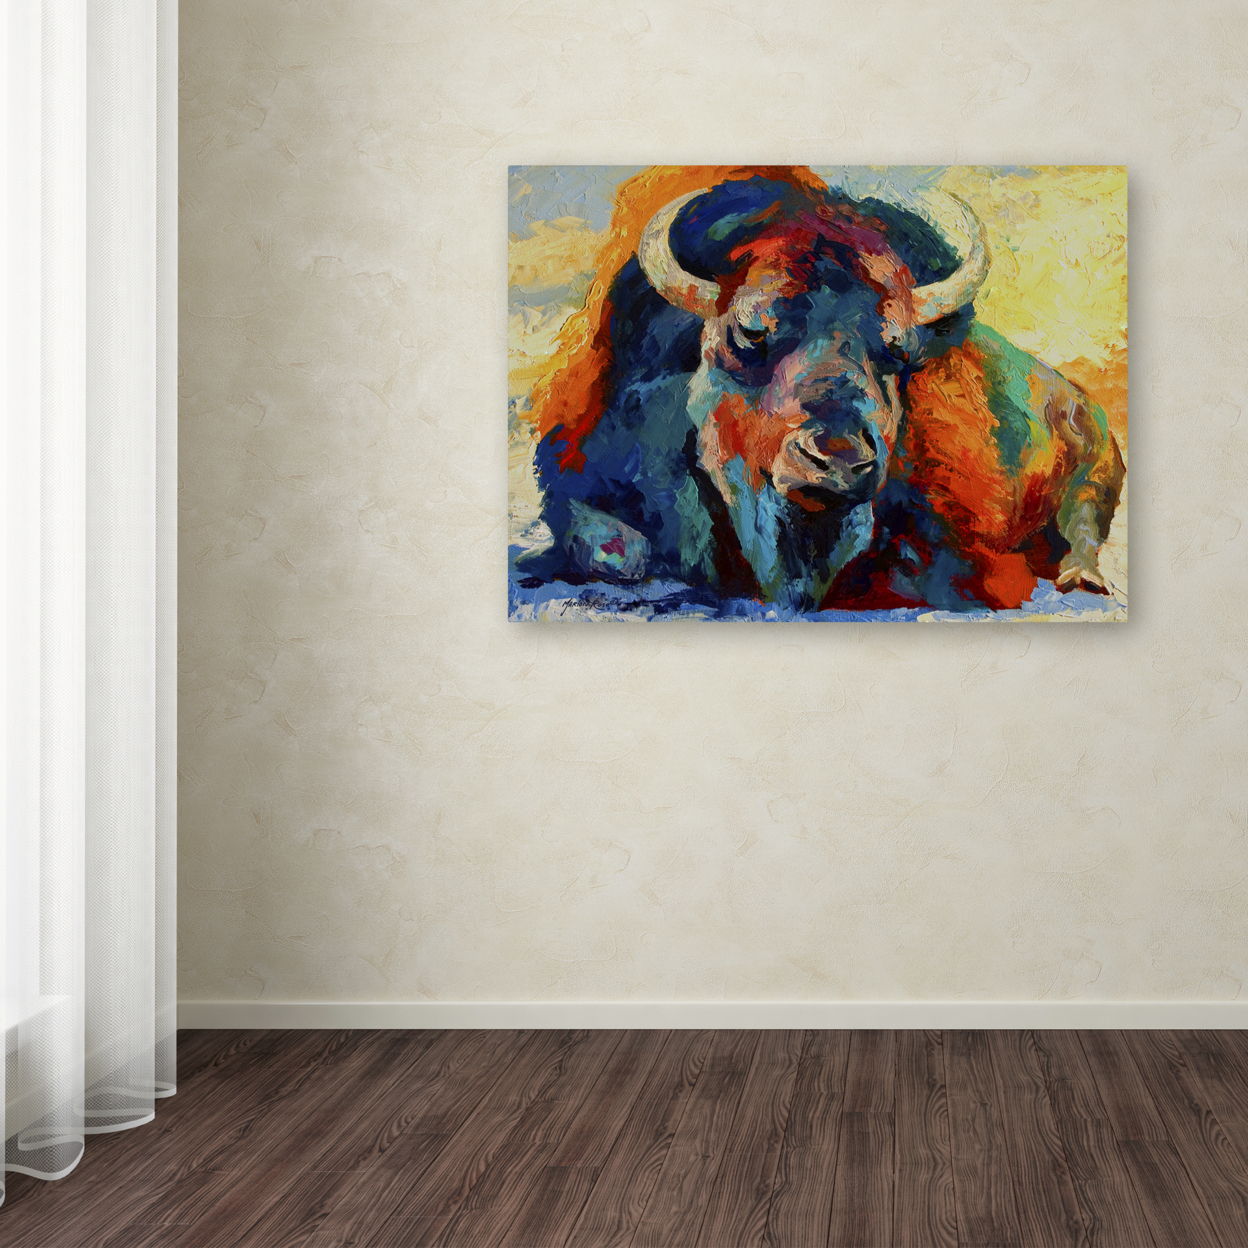 Marion Rose 'Winter Bison' Ready To Hang Canvas Art 18 X 24 Inches Made In USA